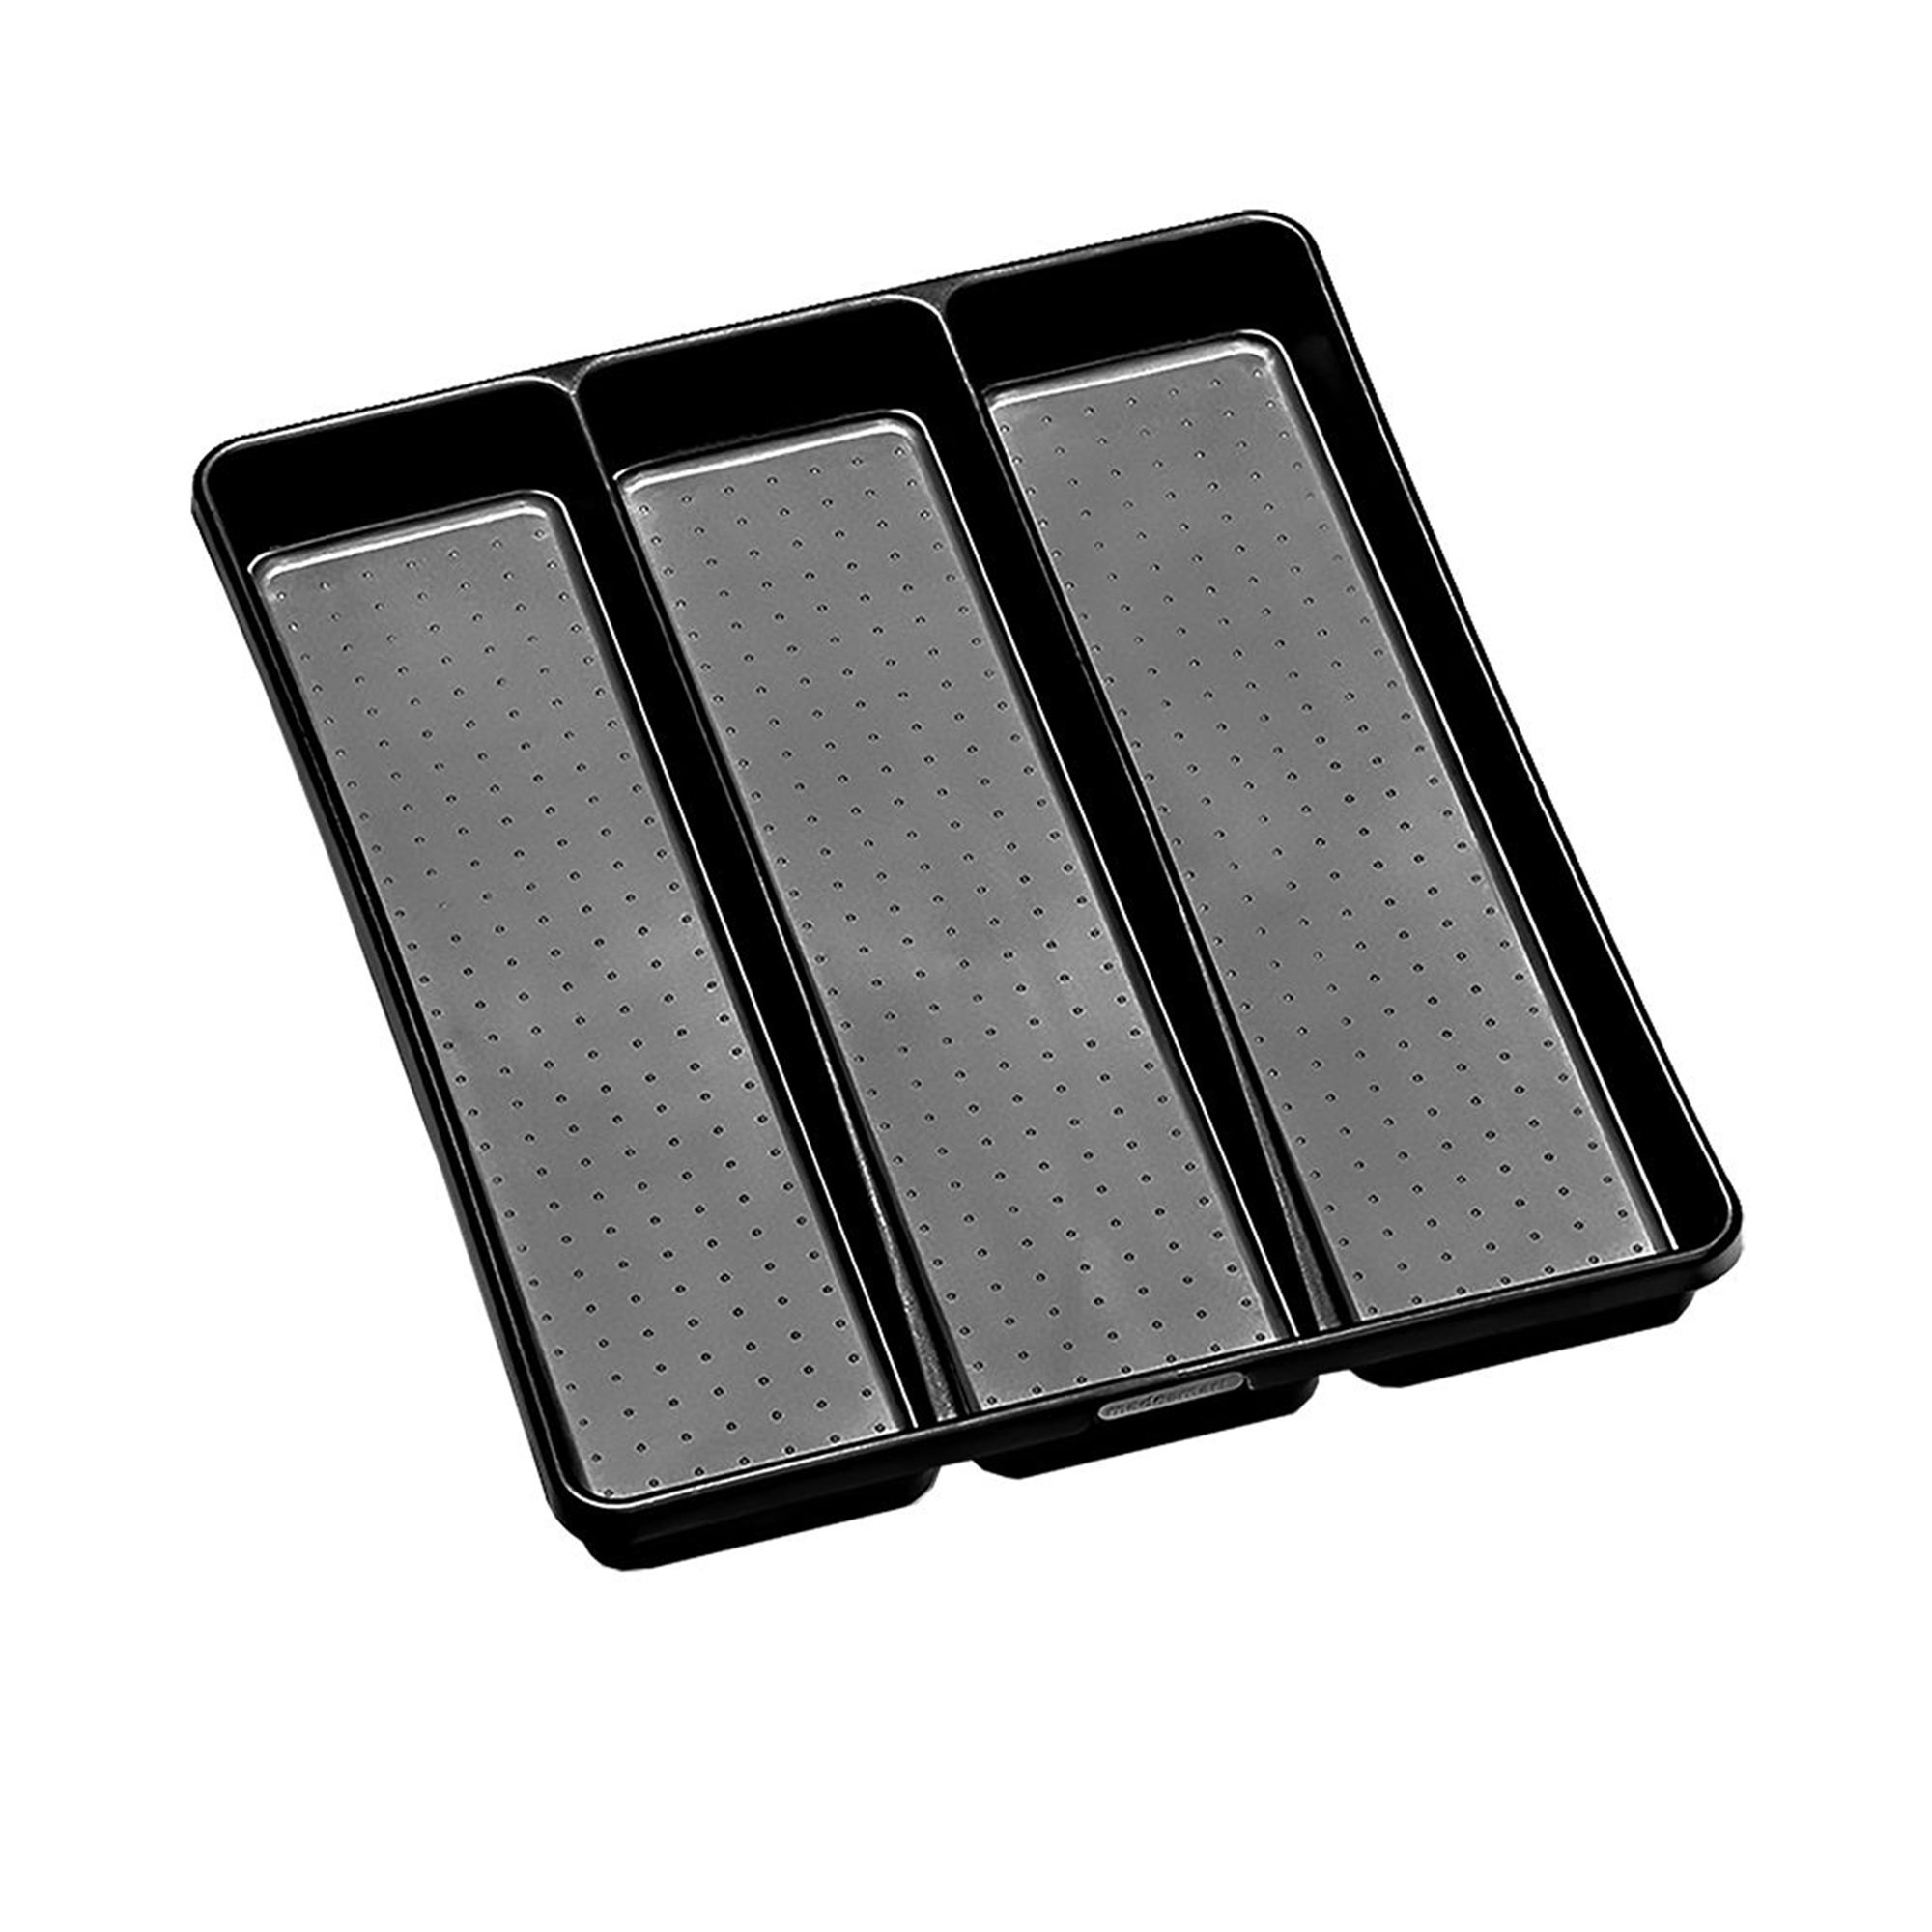 Madesmart Large Utensil Tray 3 Compartment Carbon Image 2